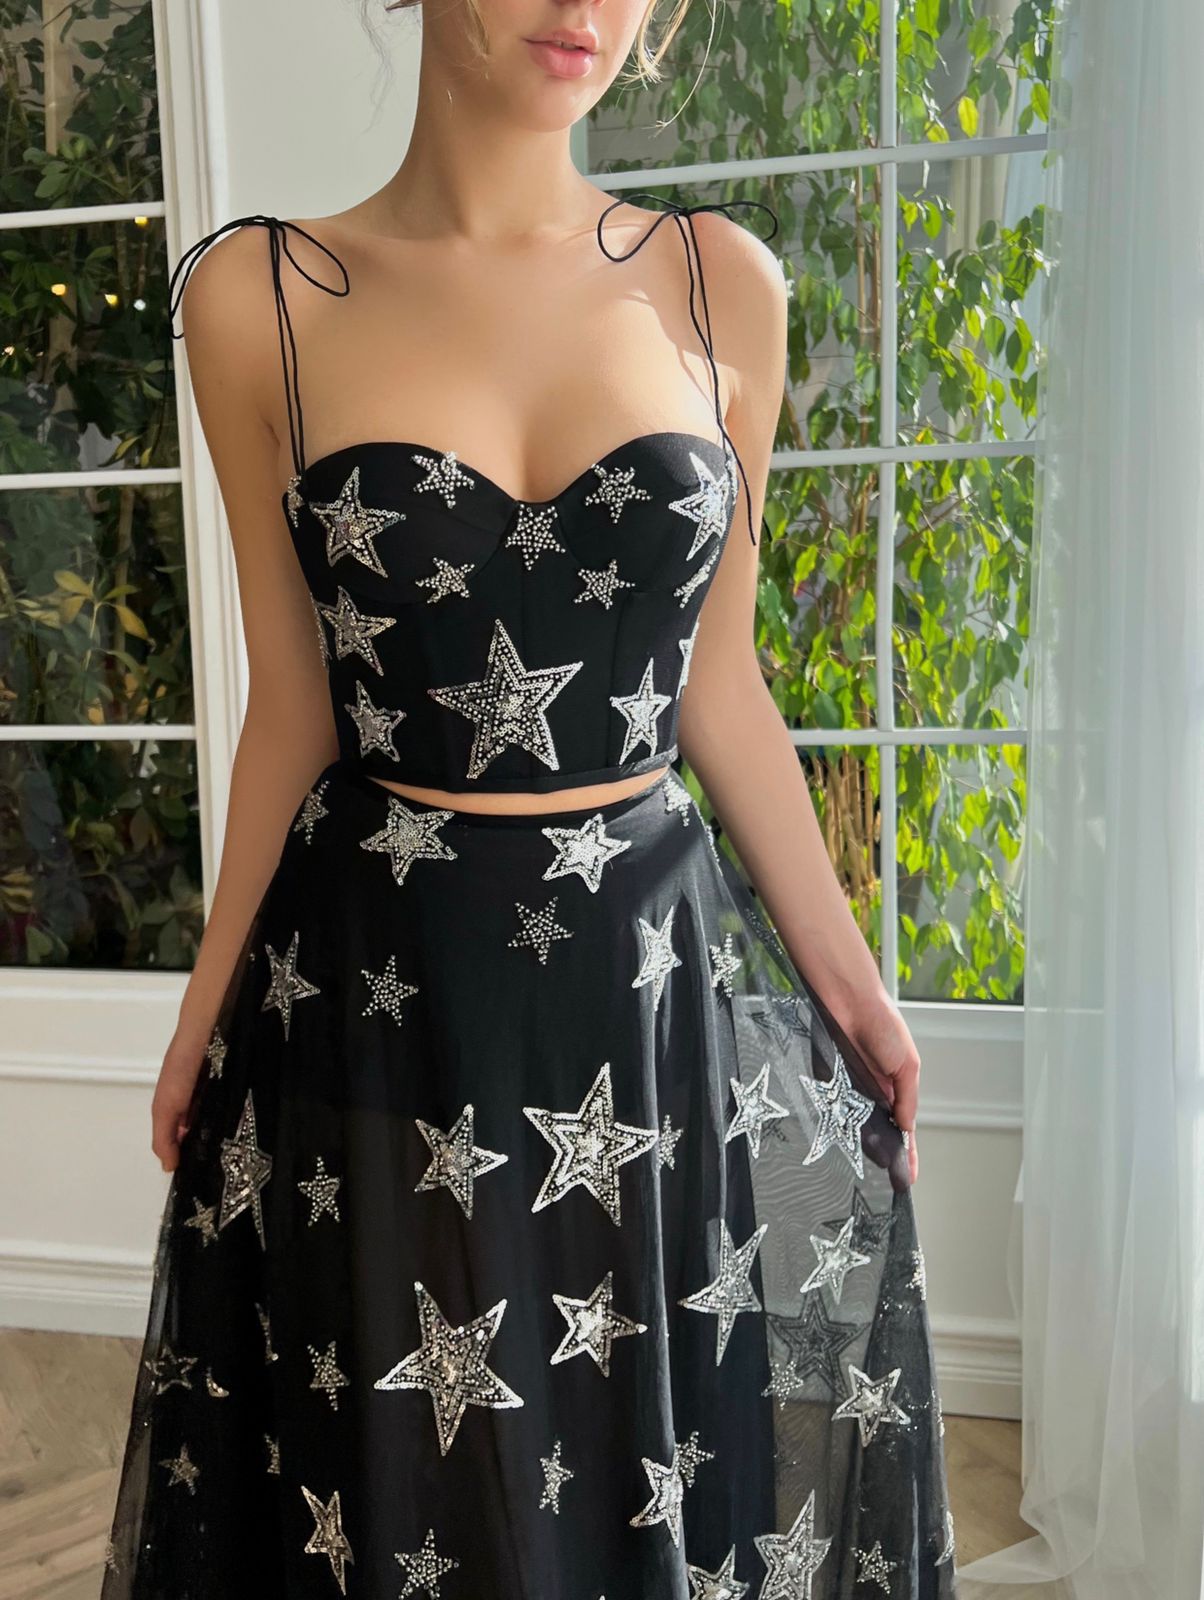 Black two piece dress with spaghetti straps and starry fabric